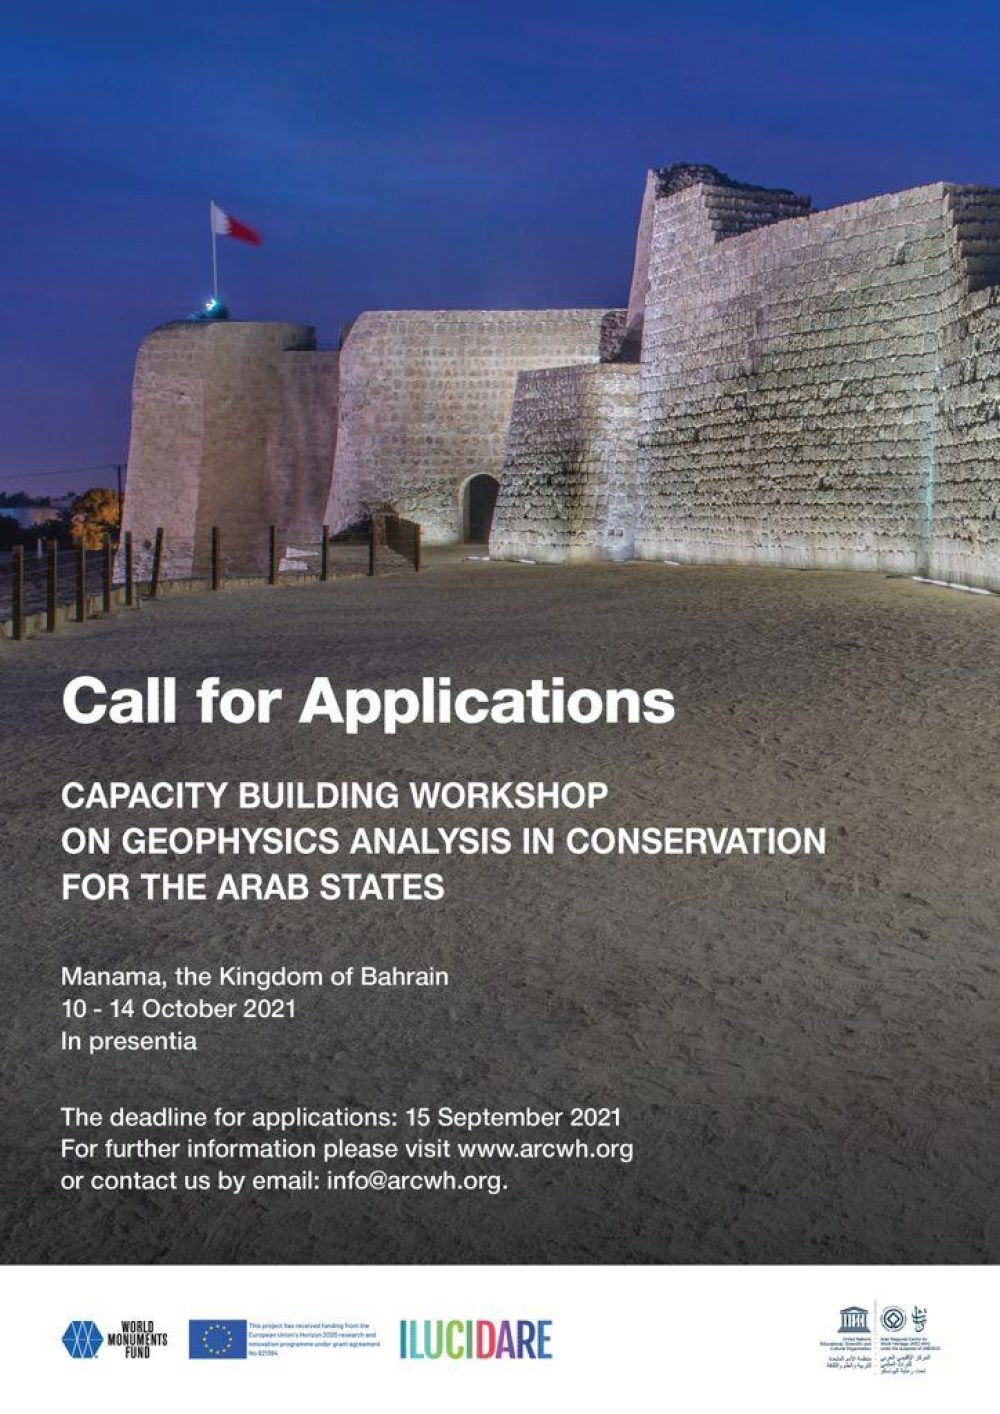 Call for Applications: Capacity Building Workshop on Geophysics Analysis in Conservation for the Arab States